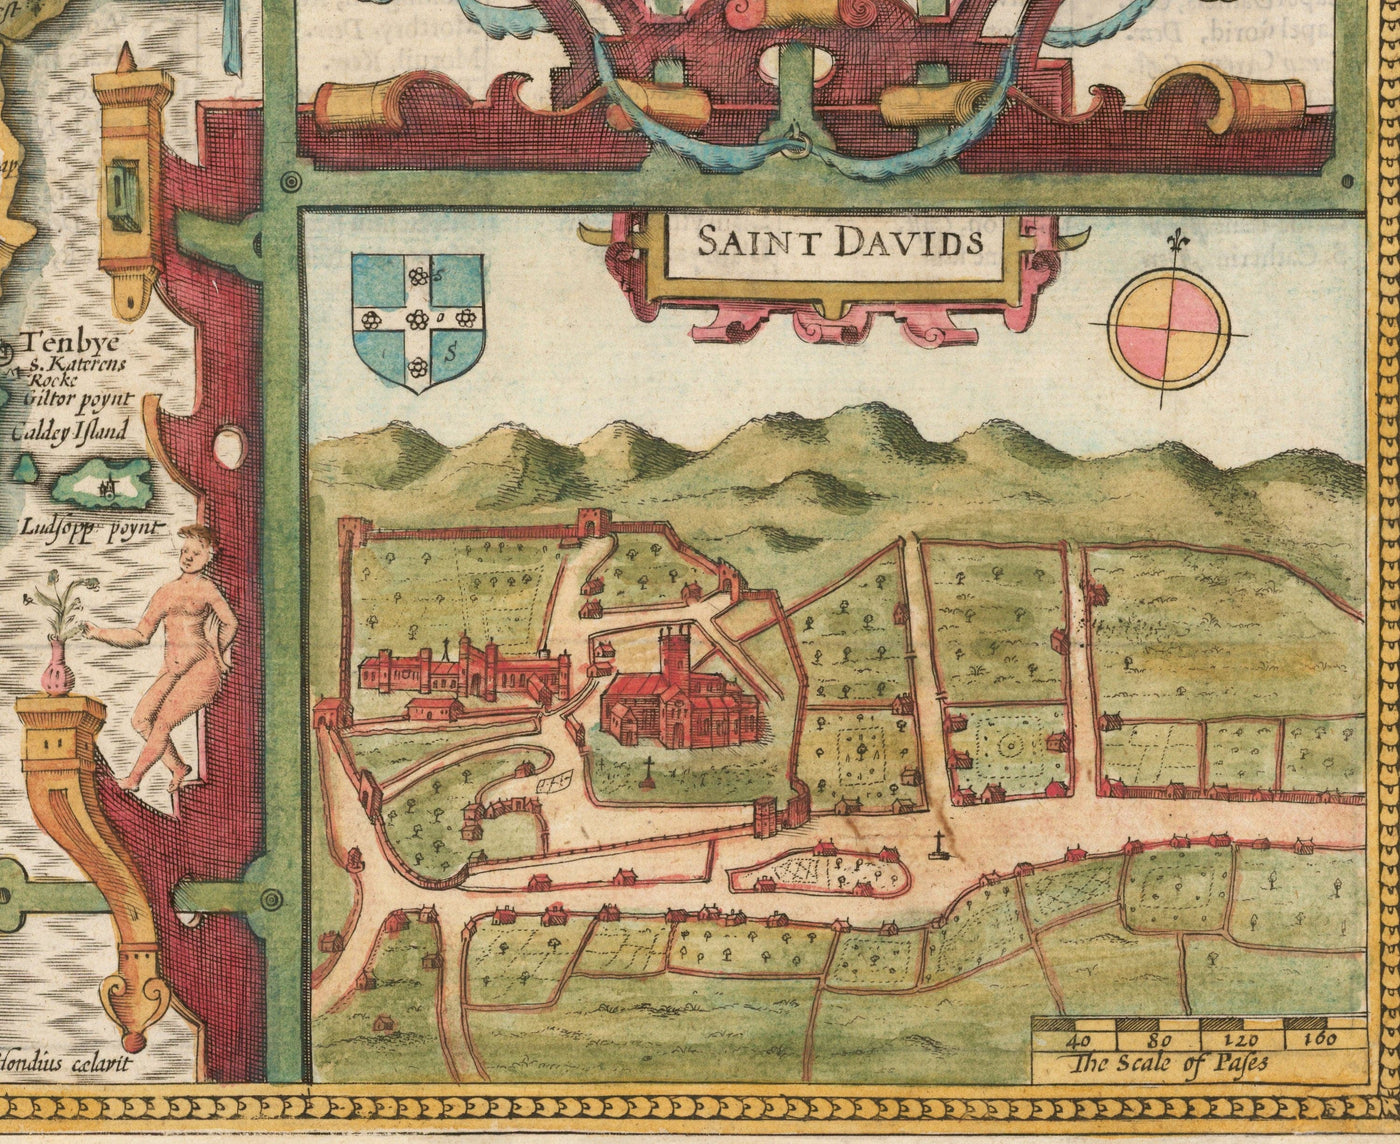 Old Map of Pembrokeshire Wales 1611 John Speed-Haverfordwest, St Davids, Fishguard